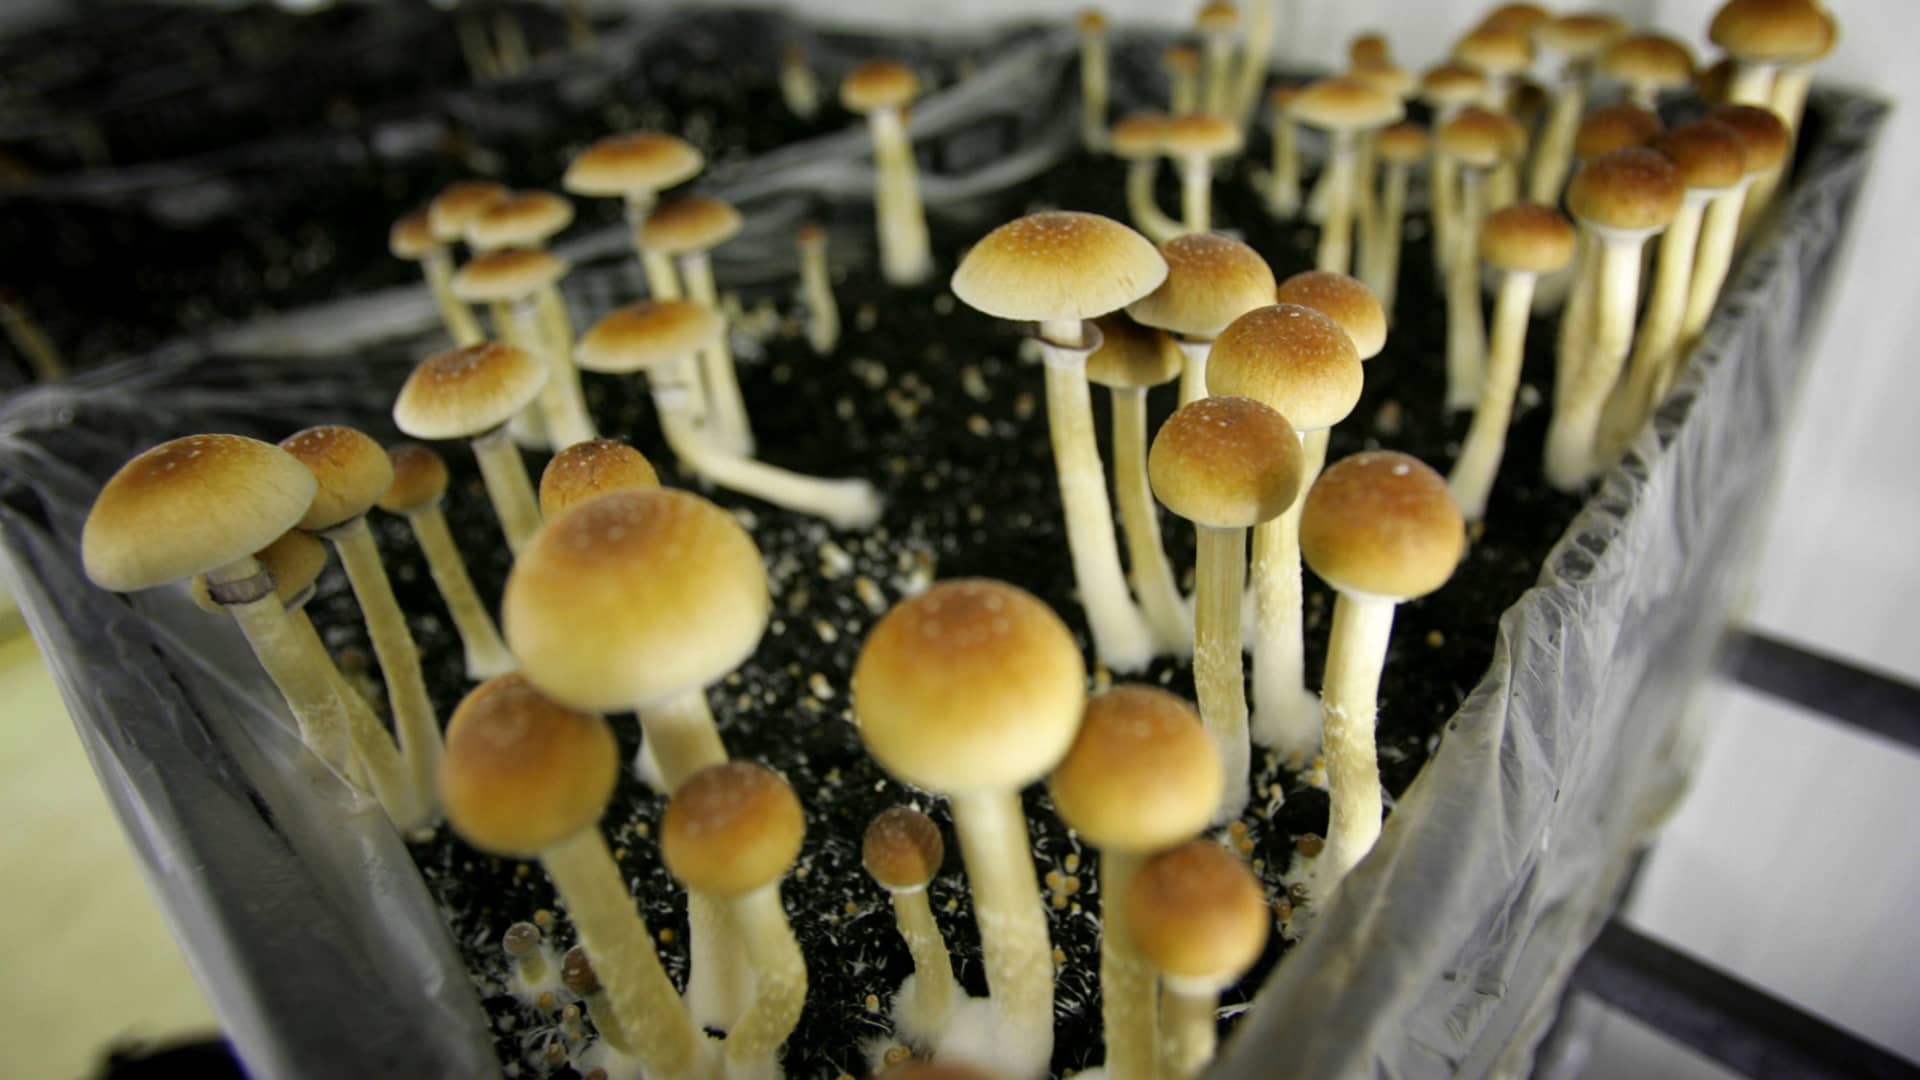 Psychedelic drug boom in mental health treatment nears reality